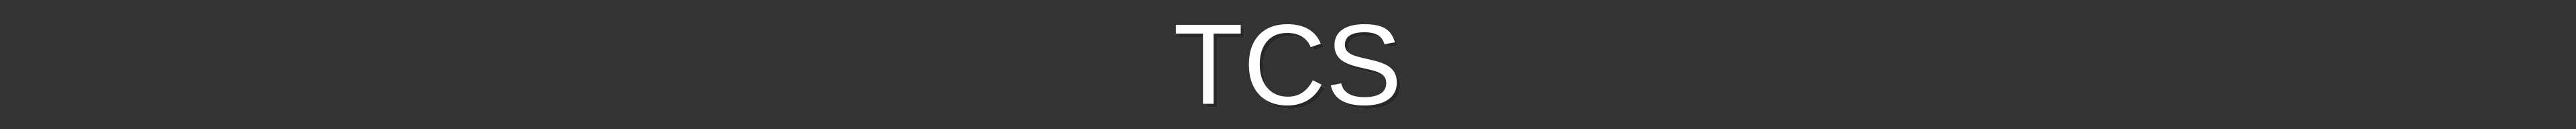 TCS-banner.png